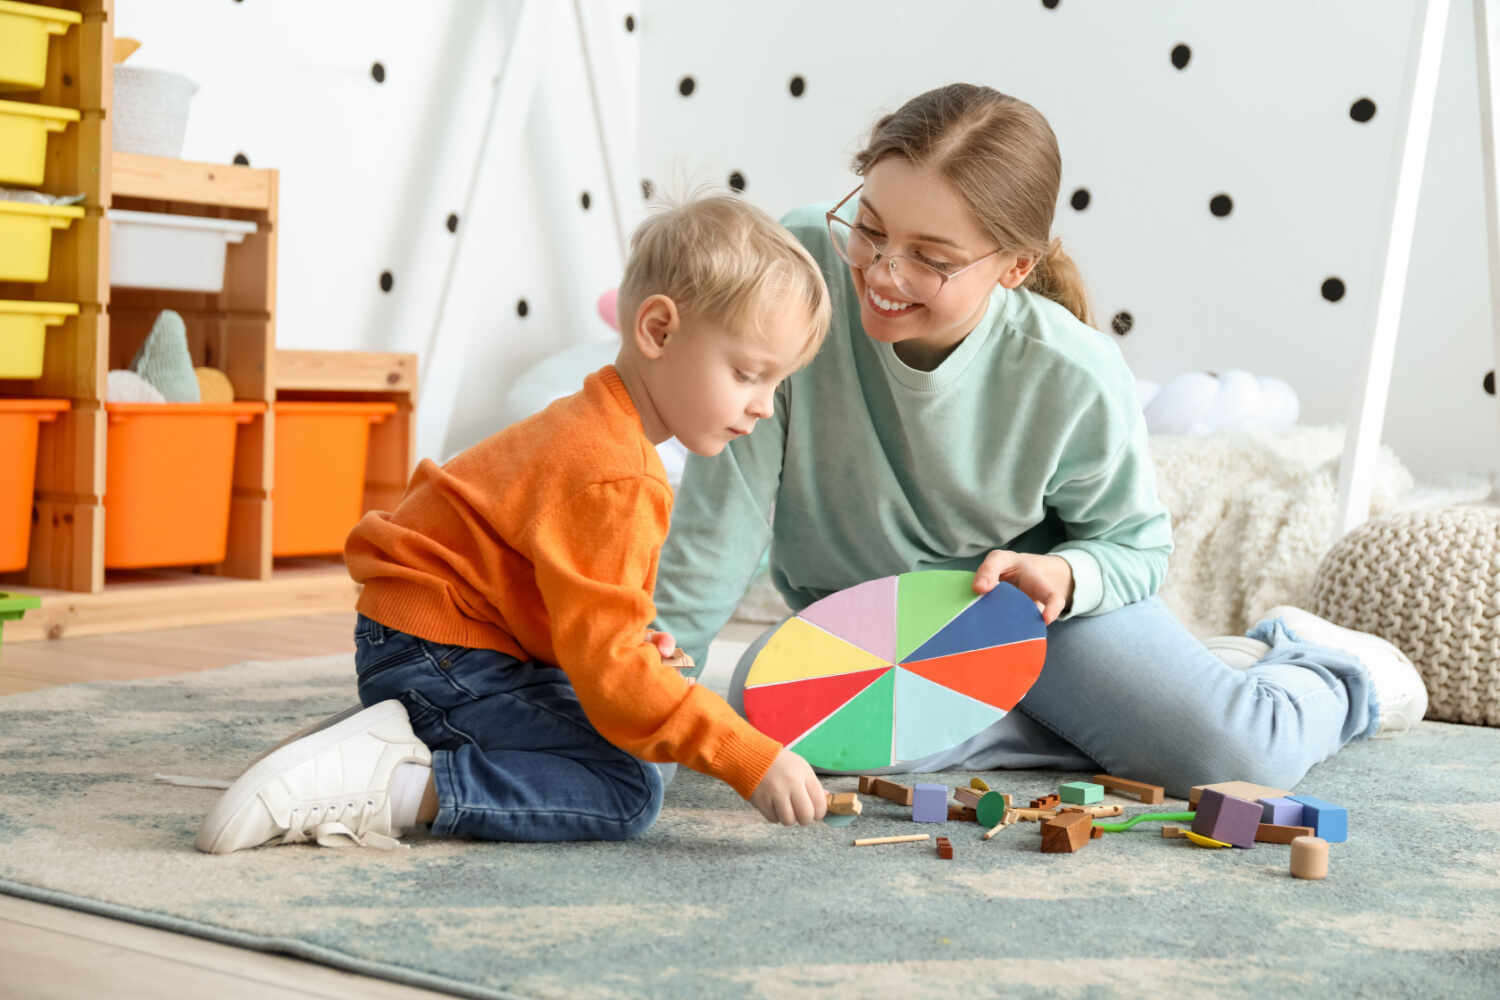 Object-to-picture matching activities teach a toddler many skills